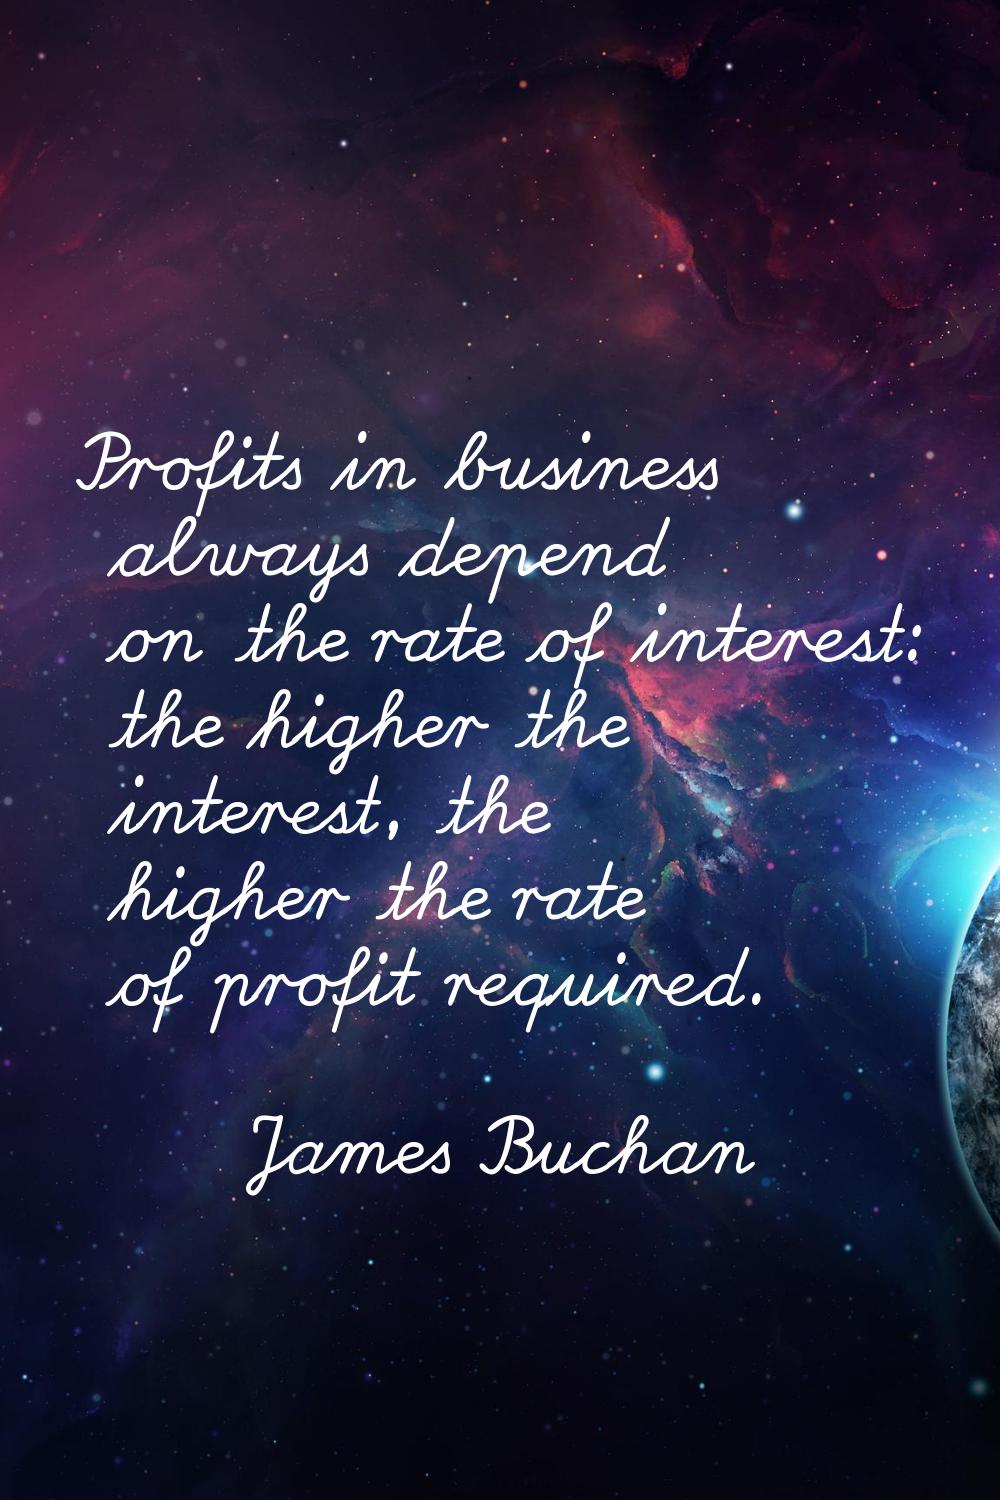 Profits in business always depend on the rate of interest: the higher the interest, the higher the 